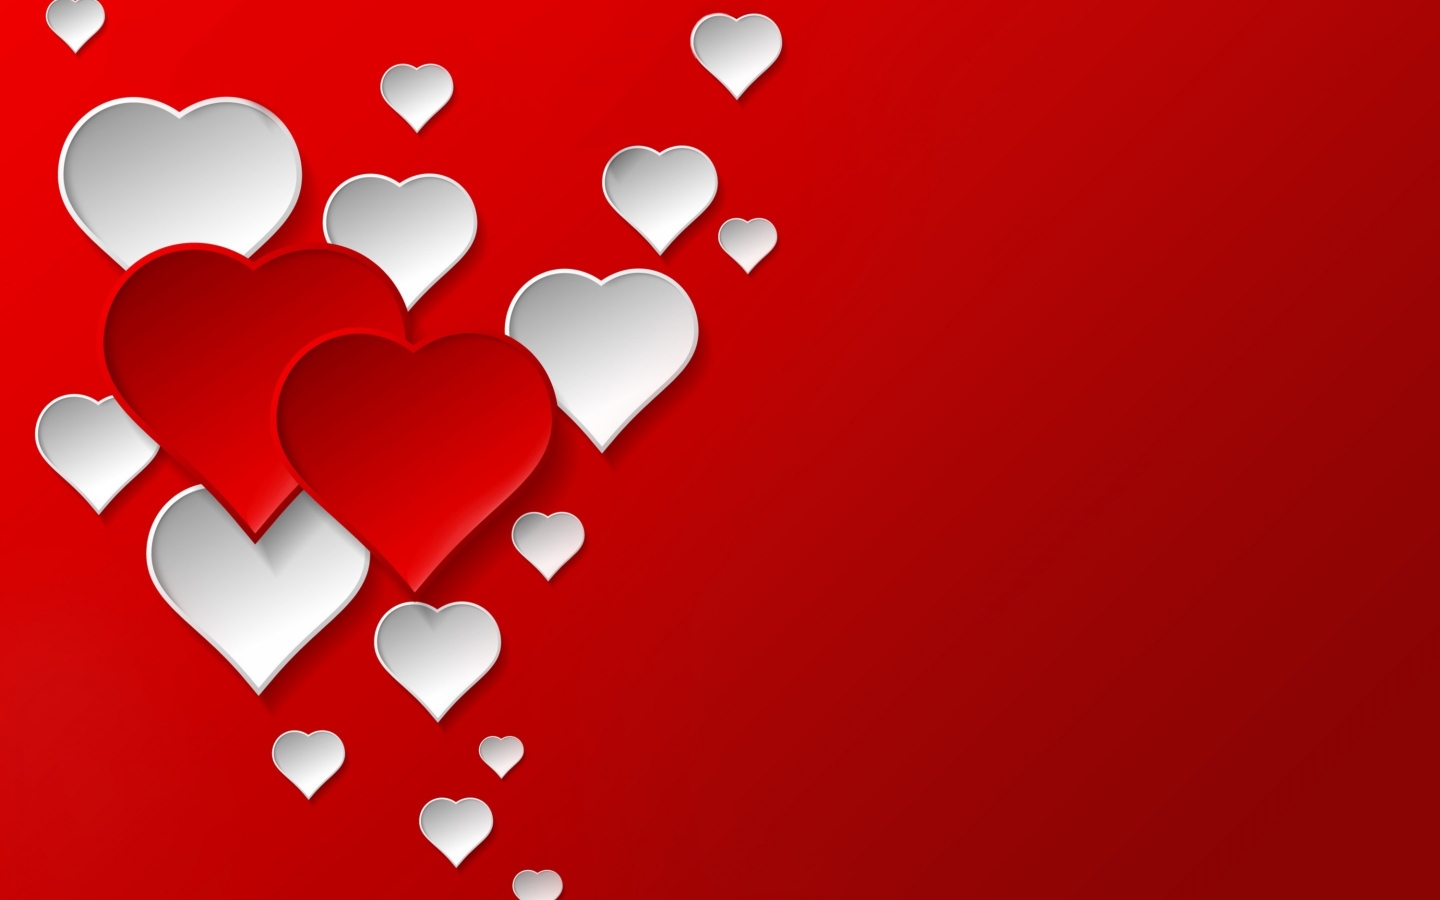 Digital Hearts for 1440 x 900 widescreen resolution